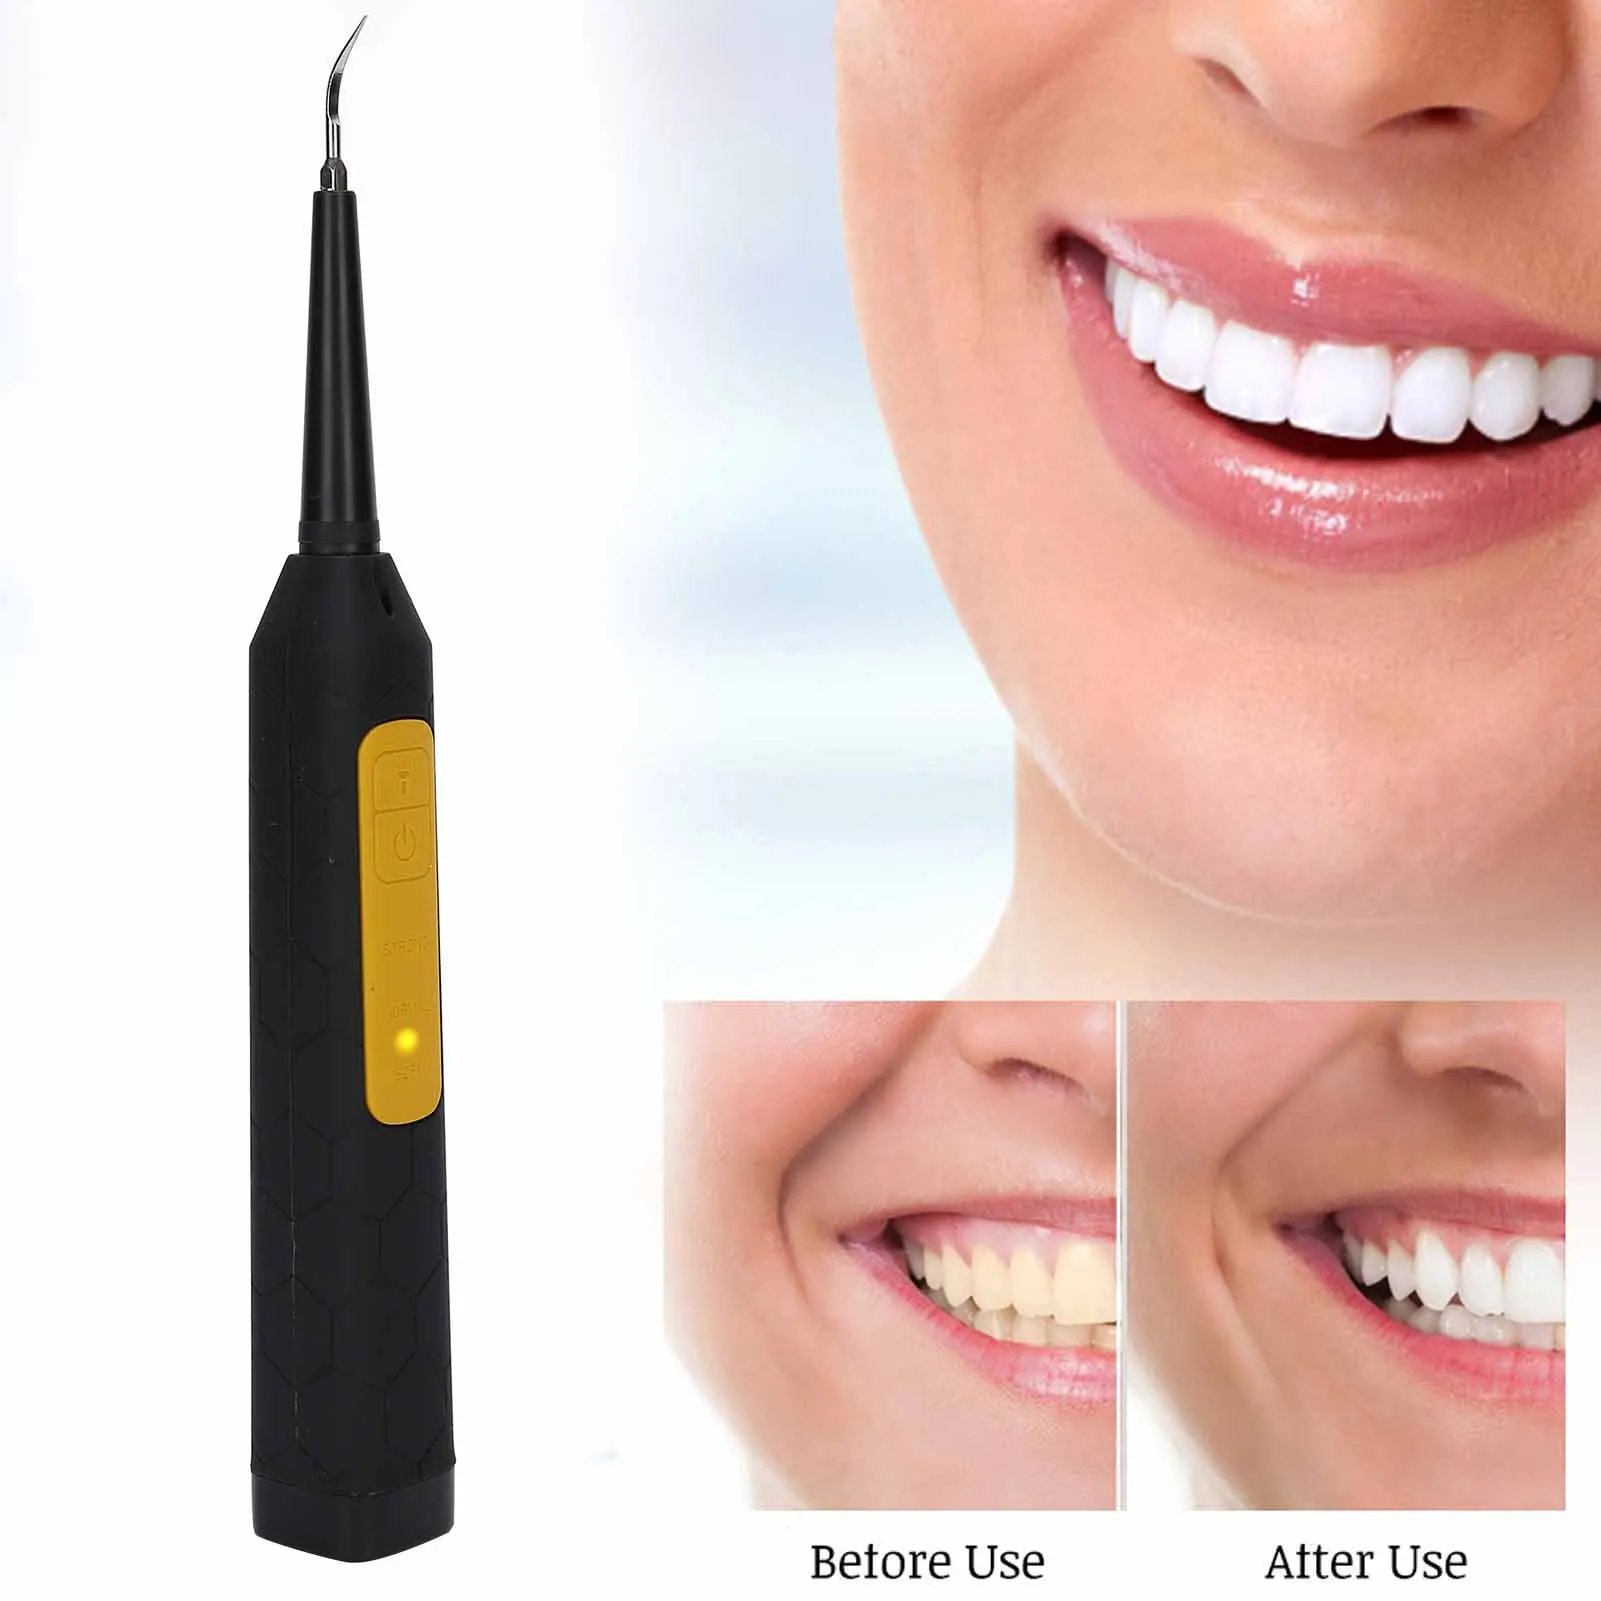 HighQuality Stainless Steel Head Tooth Cleaner Electric Calculus Remover Portable Teeth Tartar Remover Oral Care Tool USB Charg beauty tool false teeth instant smile comfort fit flex fake tooth cover